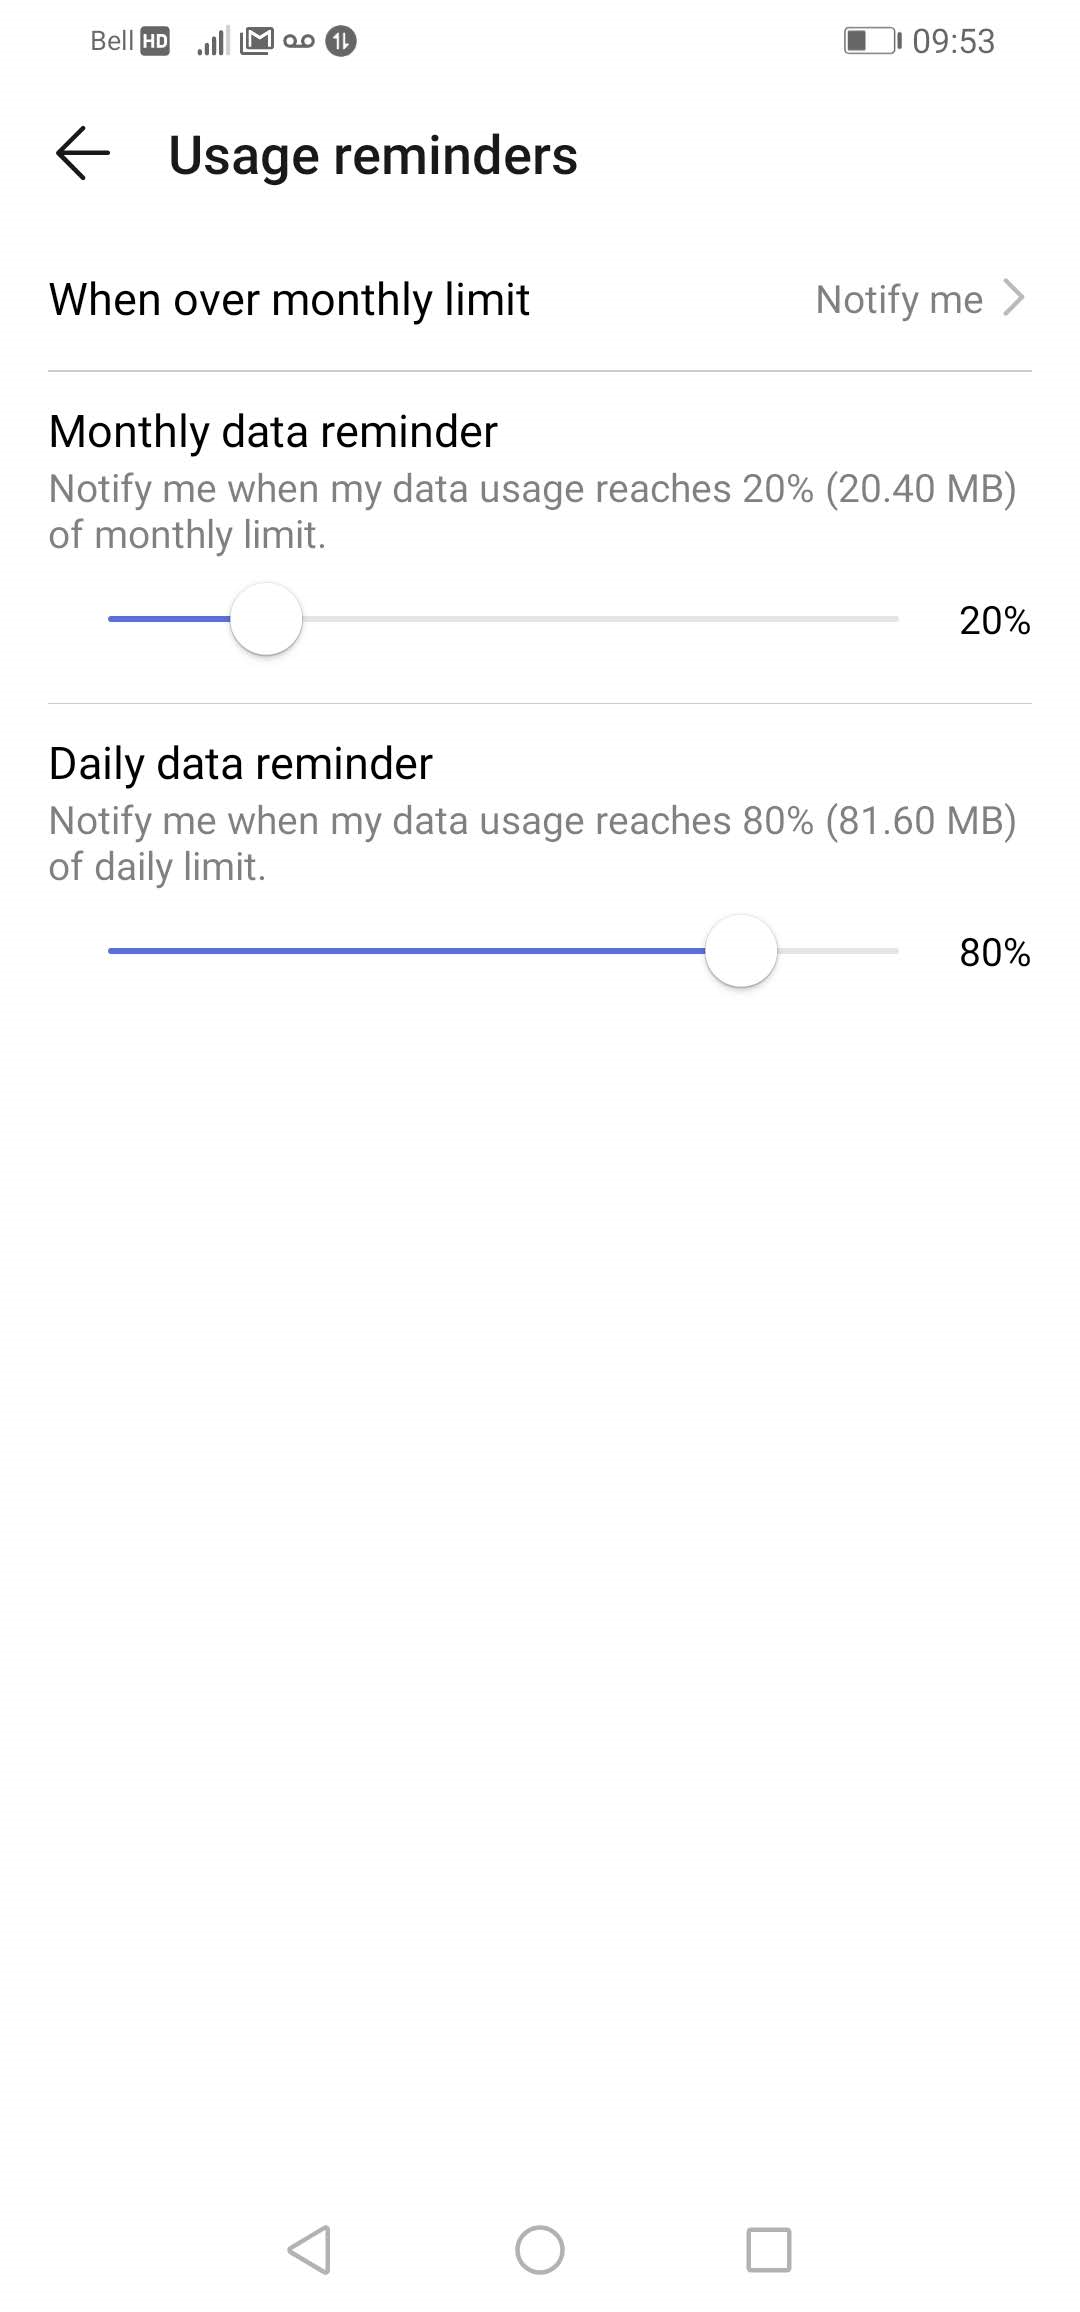 Drag the Daily data reminder slider to the desired amount.